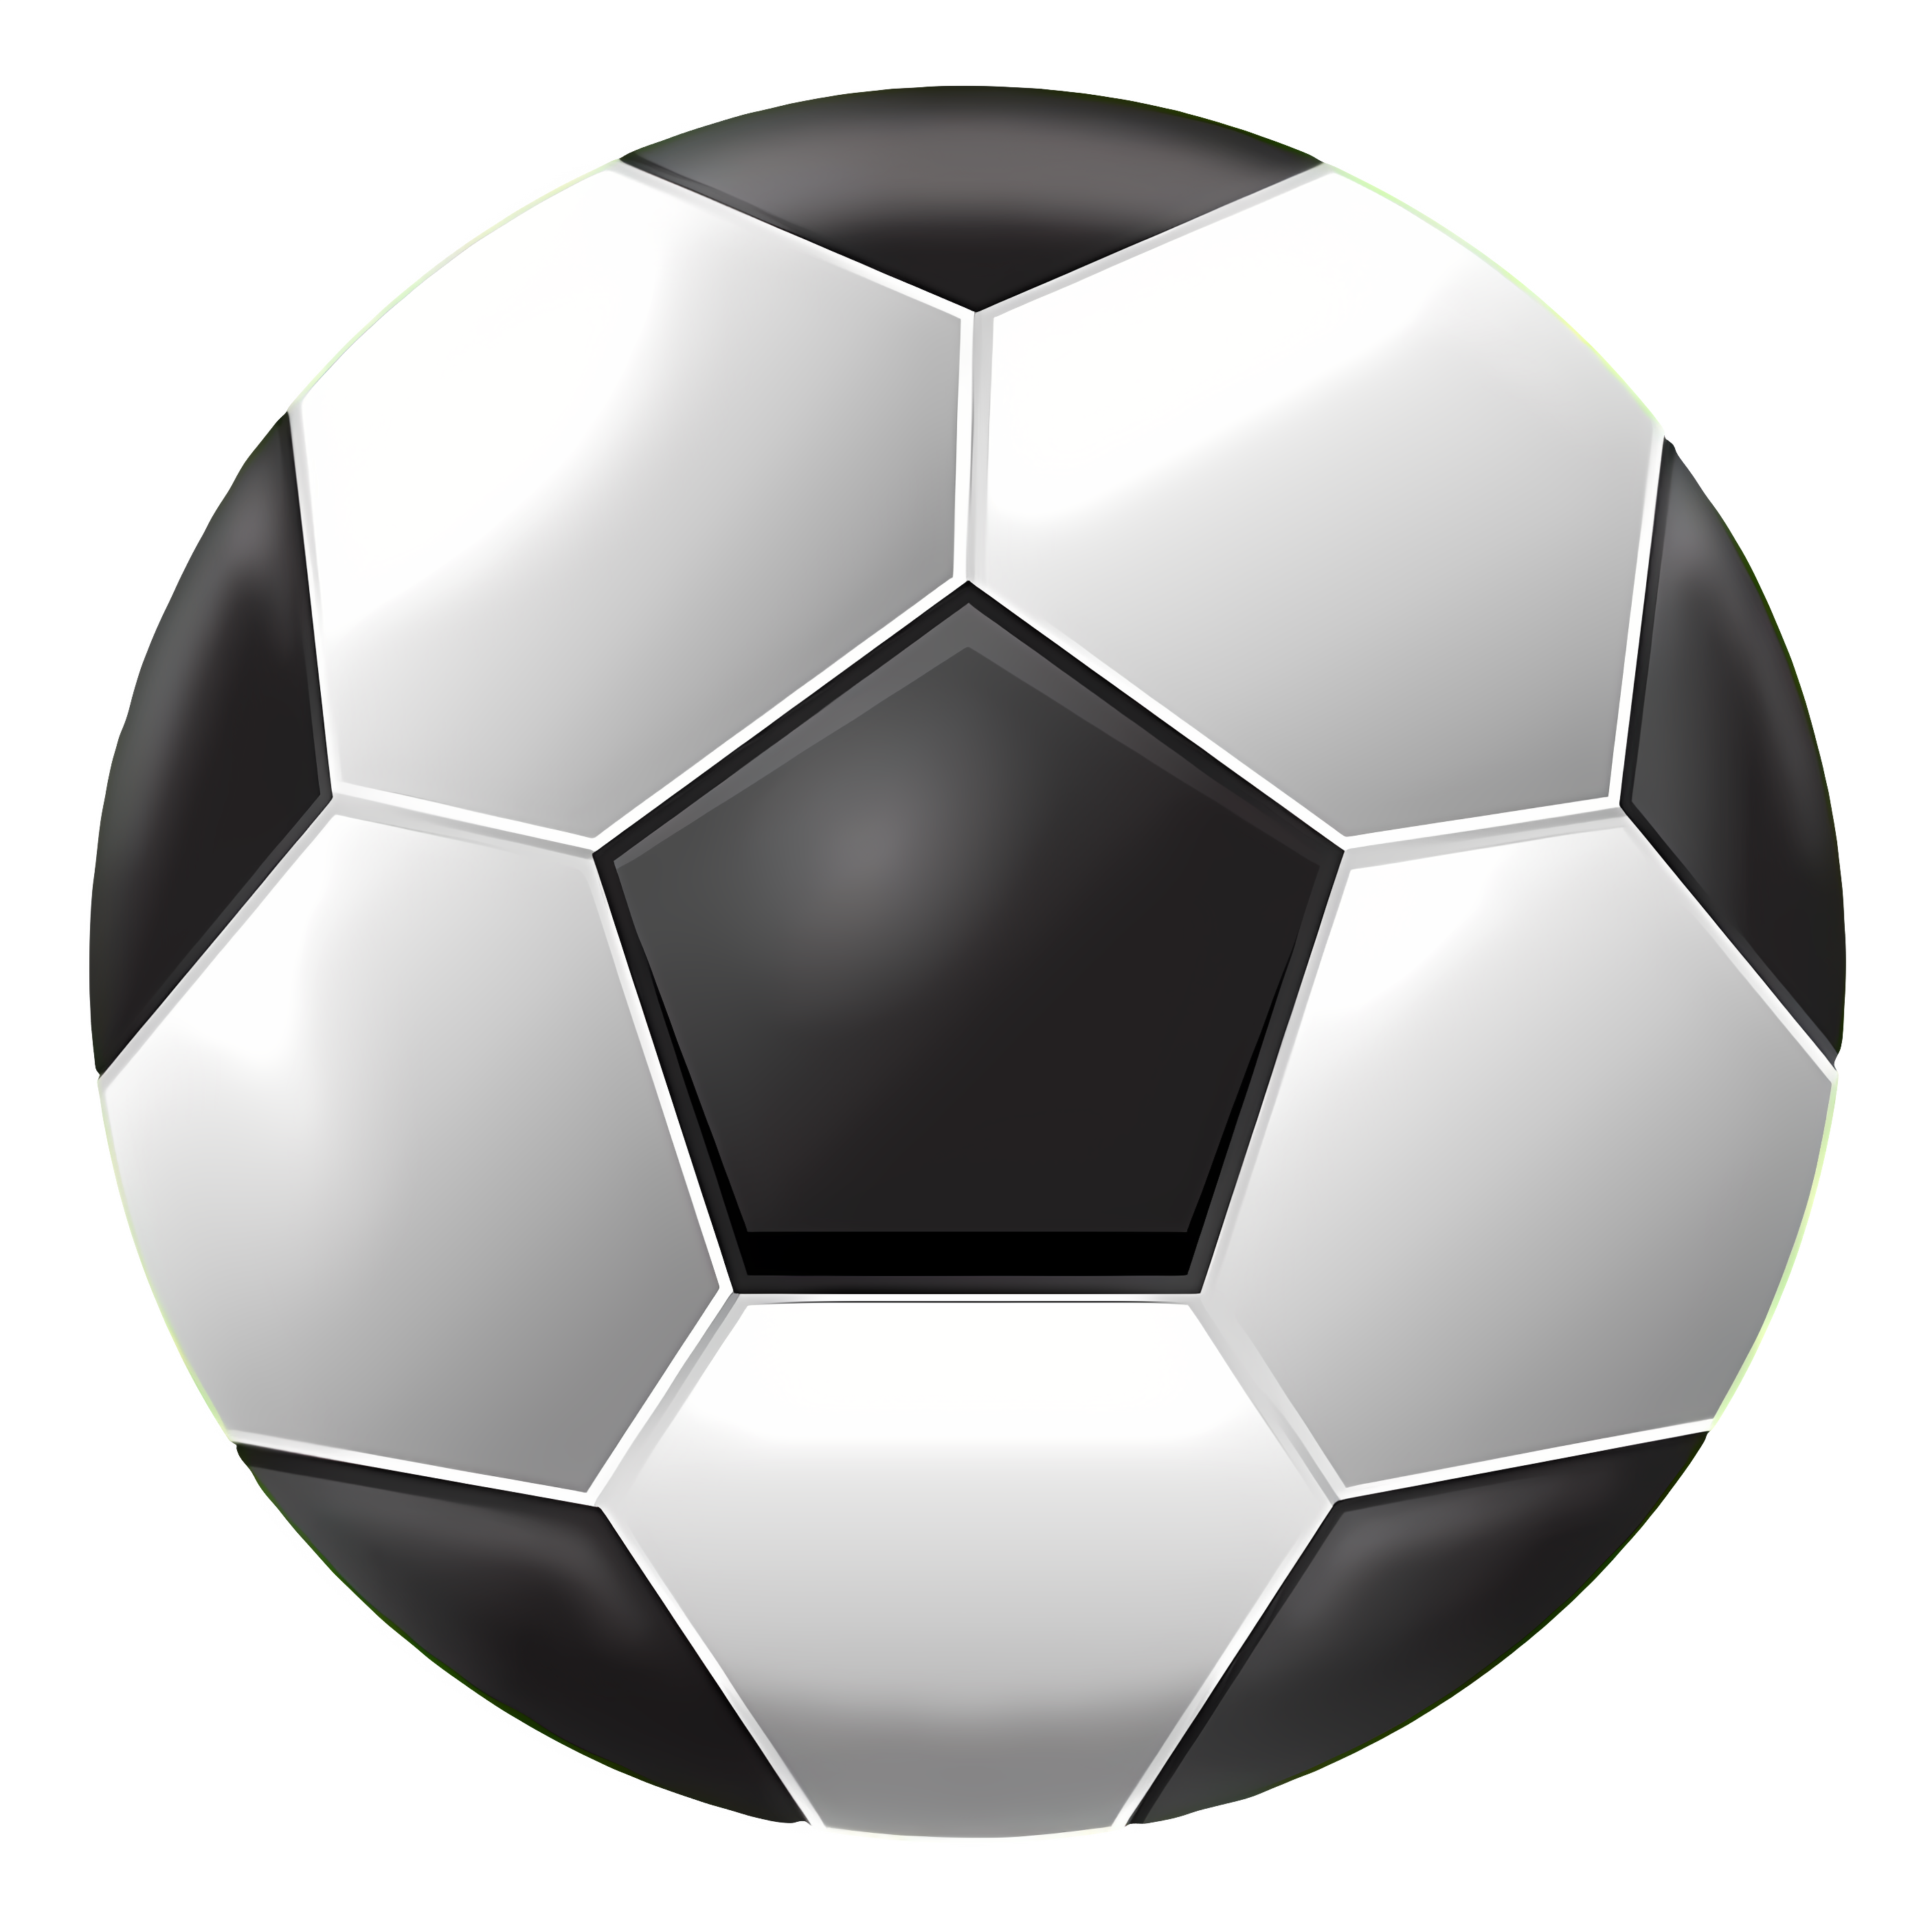 Soccer ball with black and white stripes Clipart